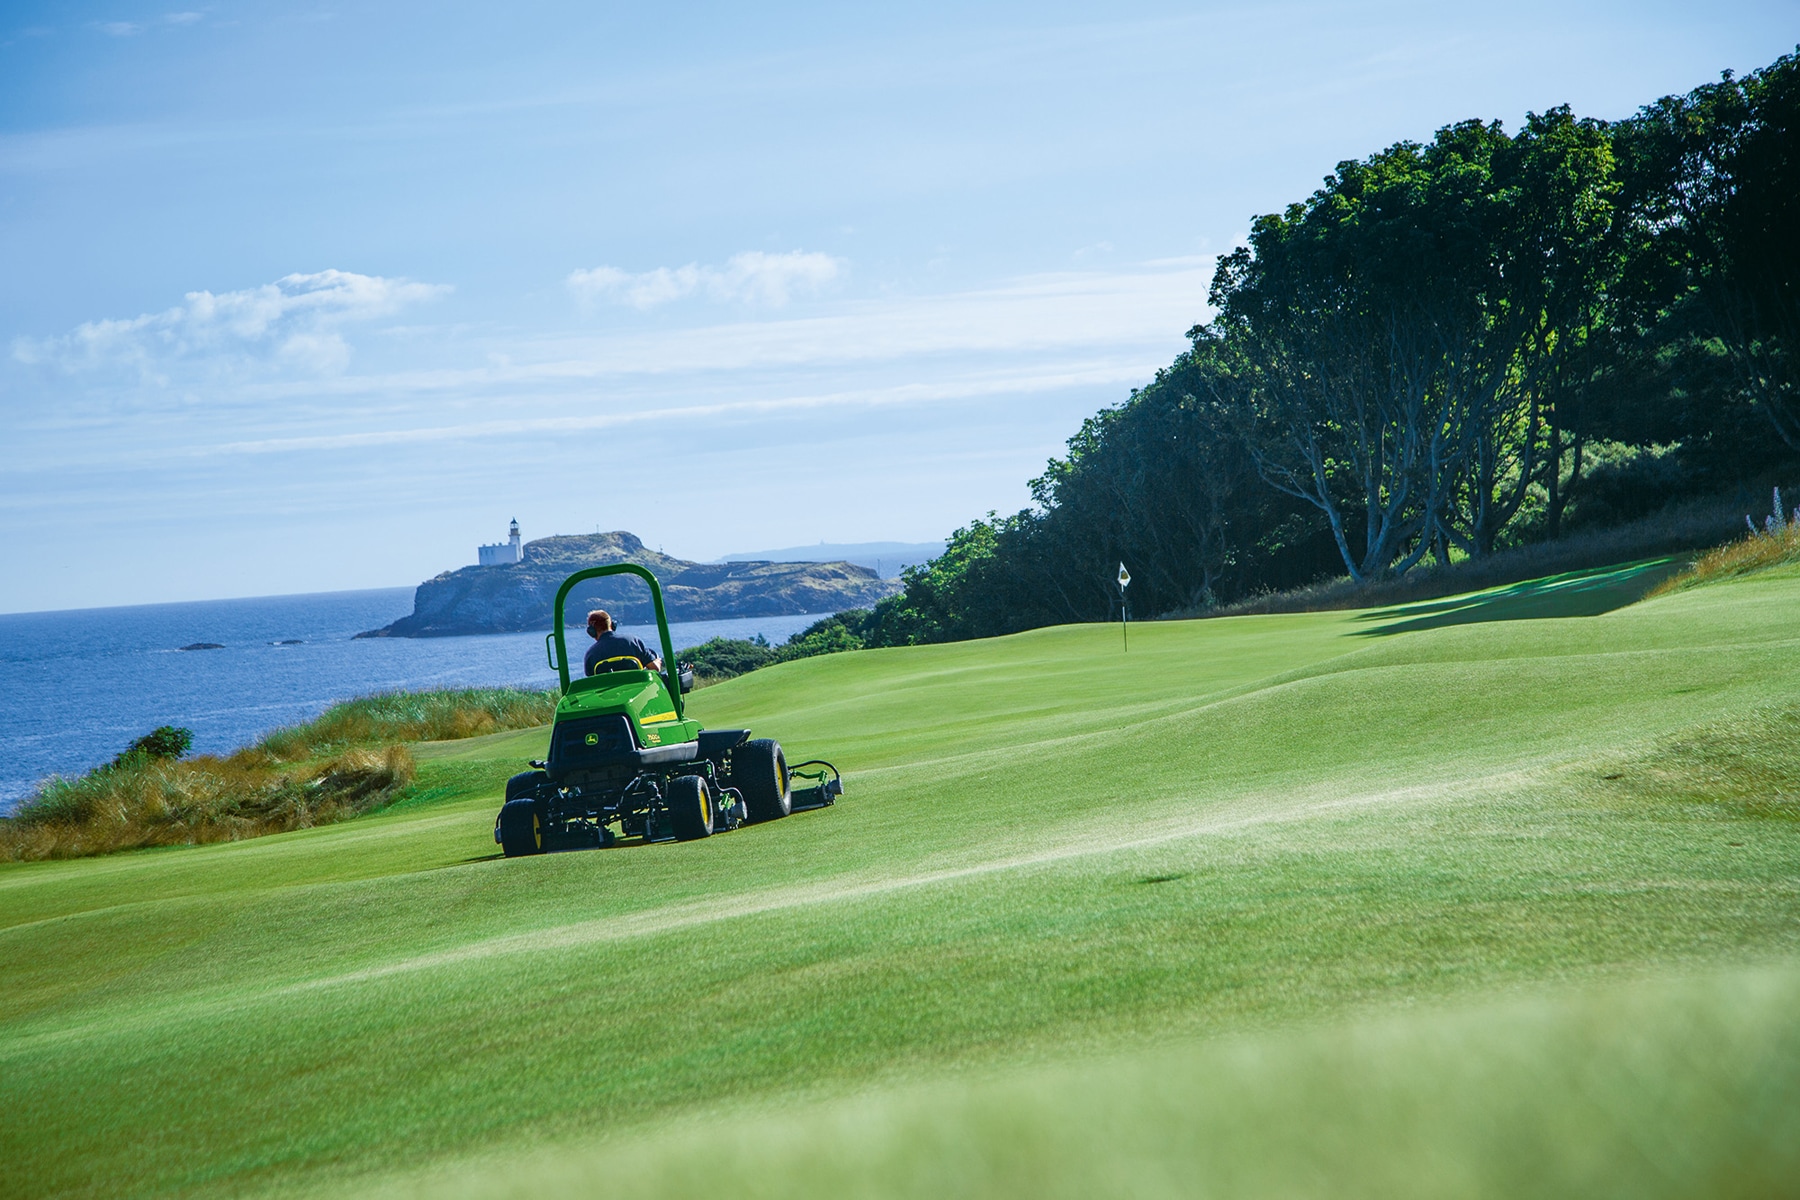 A John Deere 7500AE hybrid electric fairway mower working on the 10th hole (Championship 13th) at The Renaissance Club.